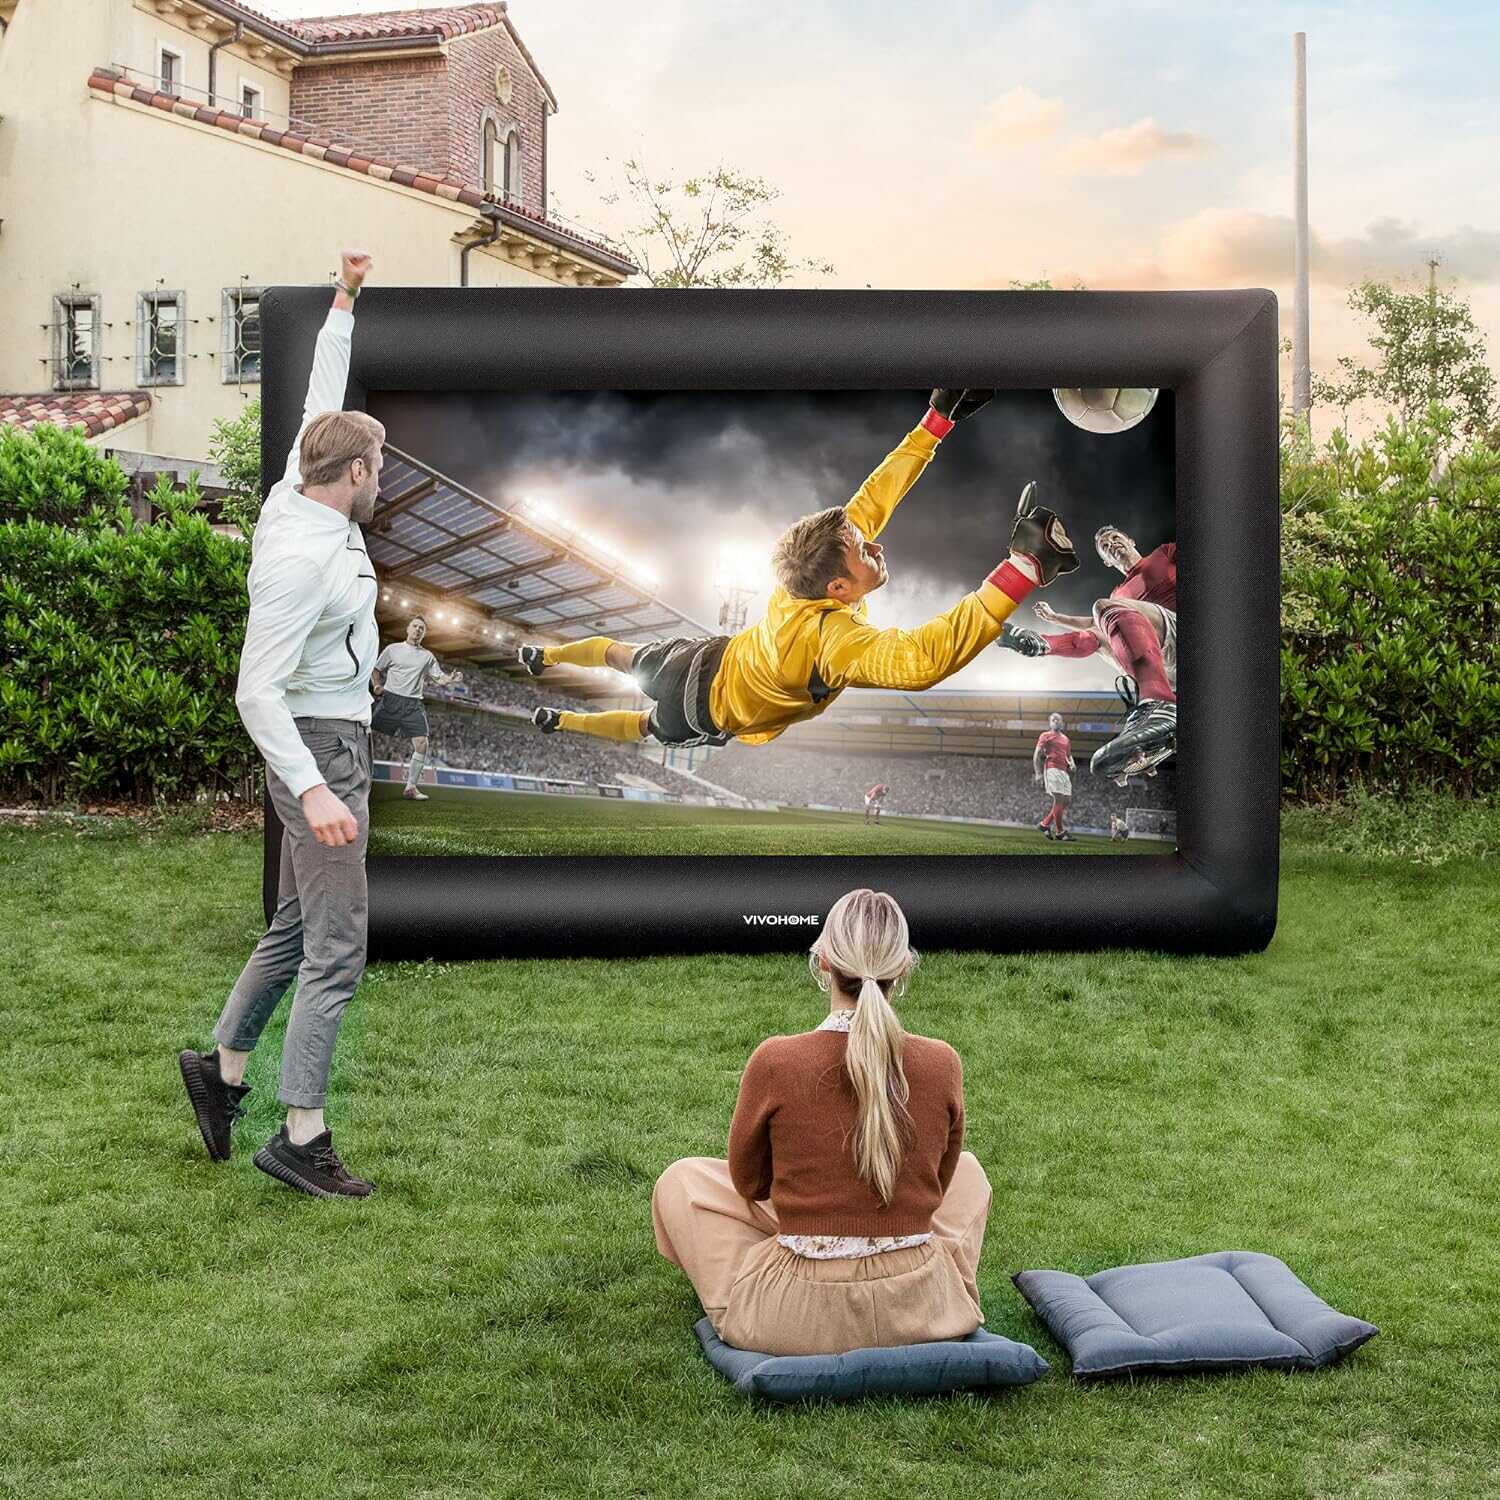 VIVOHOME Inflatable Projector Screen with Air Blower and Carry Bag